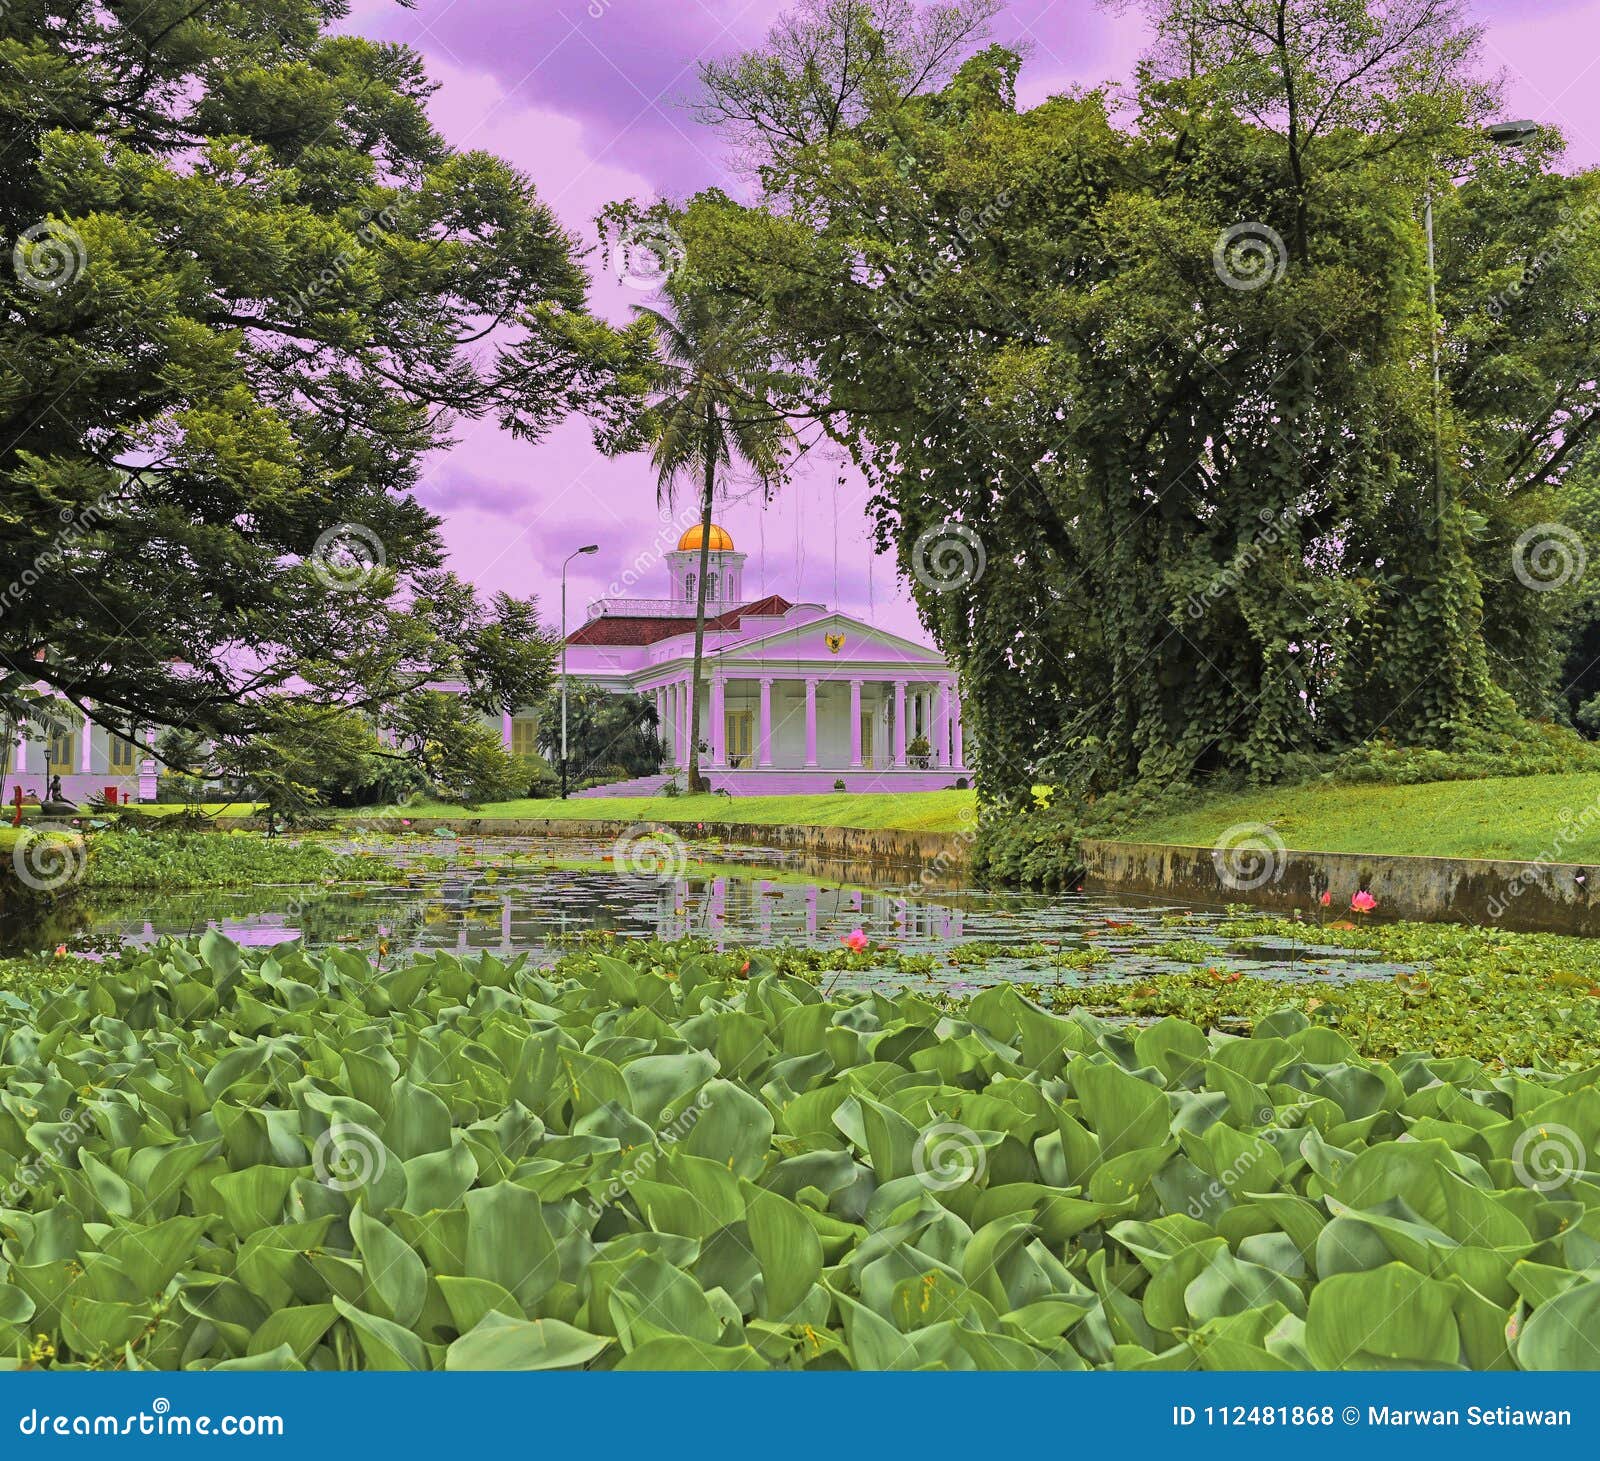 172 Bogor Palace Photos Free Royalty Free Stock Photos From Dreamstime